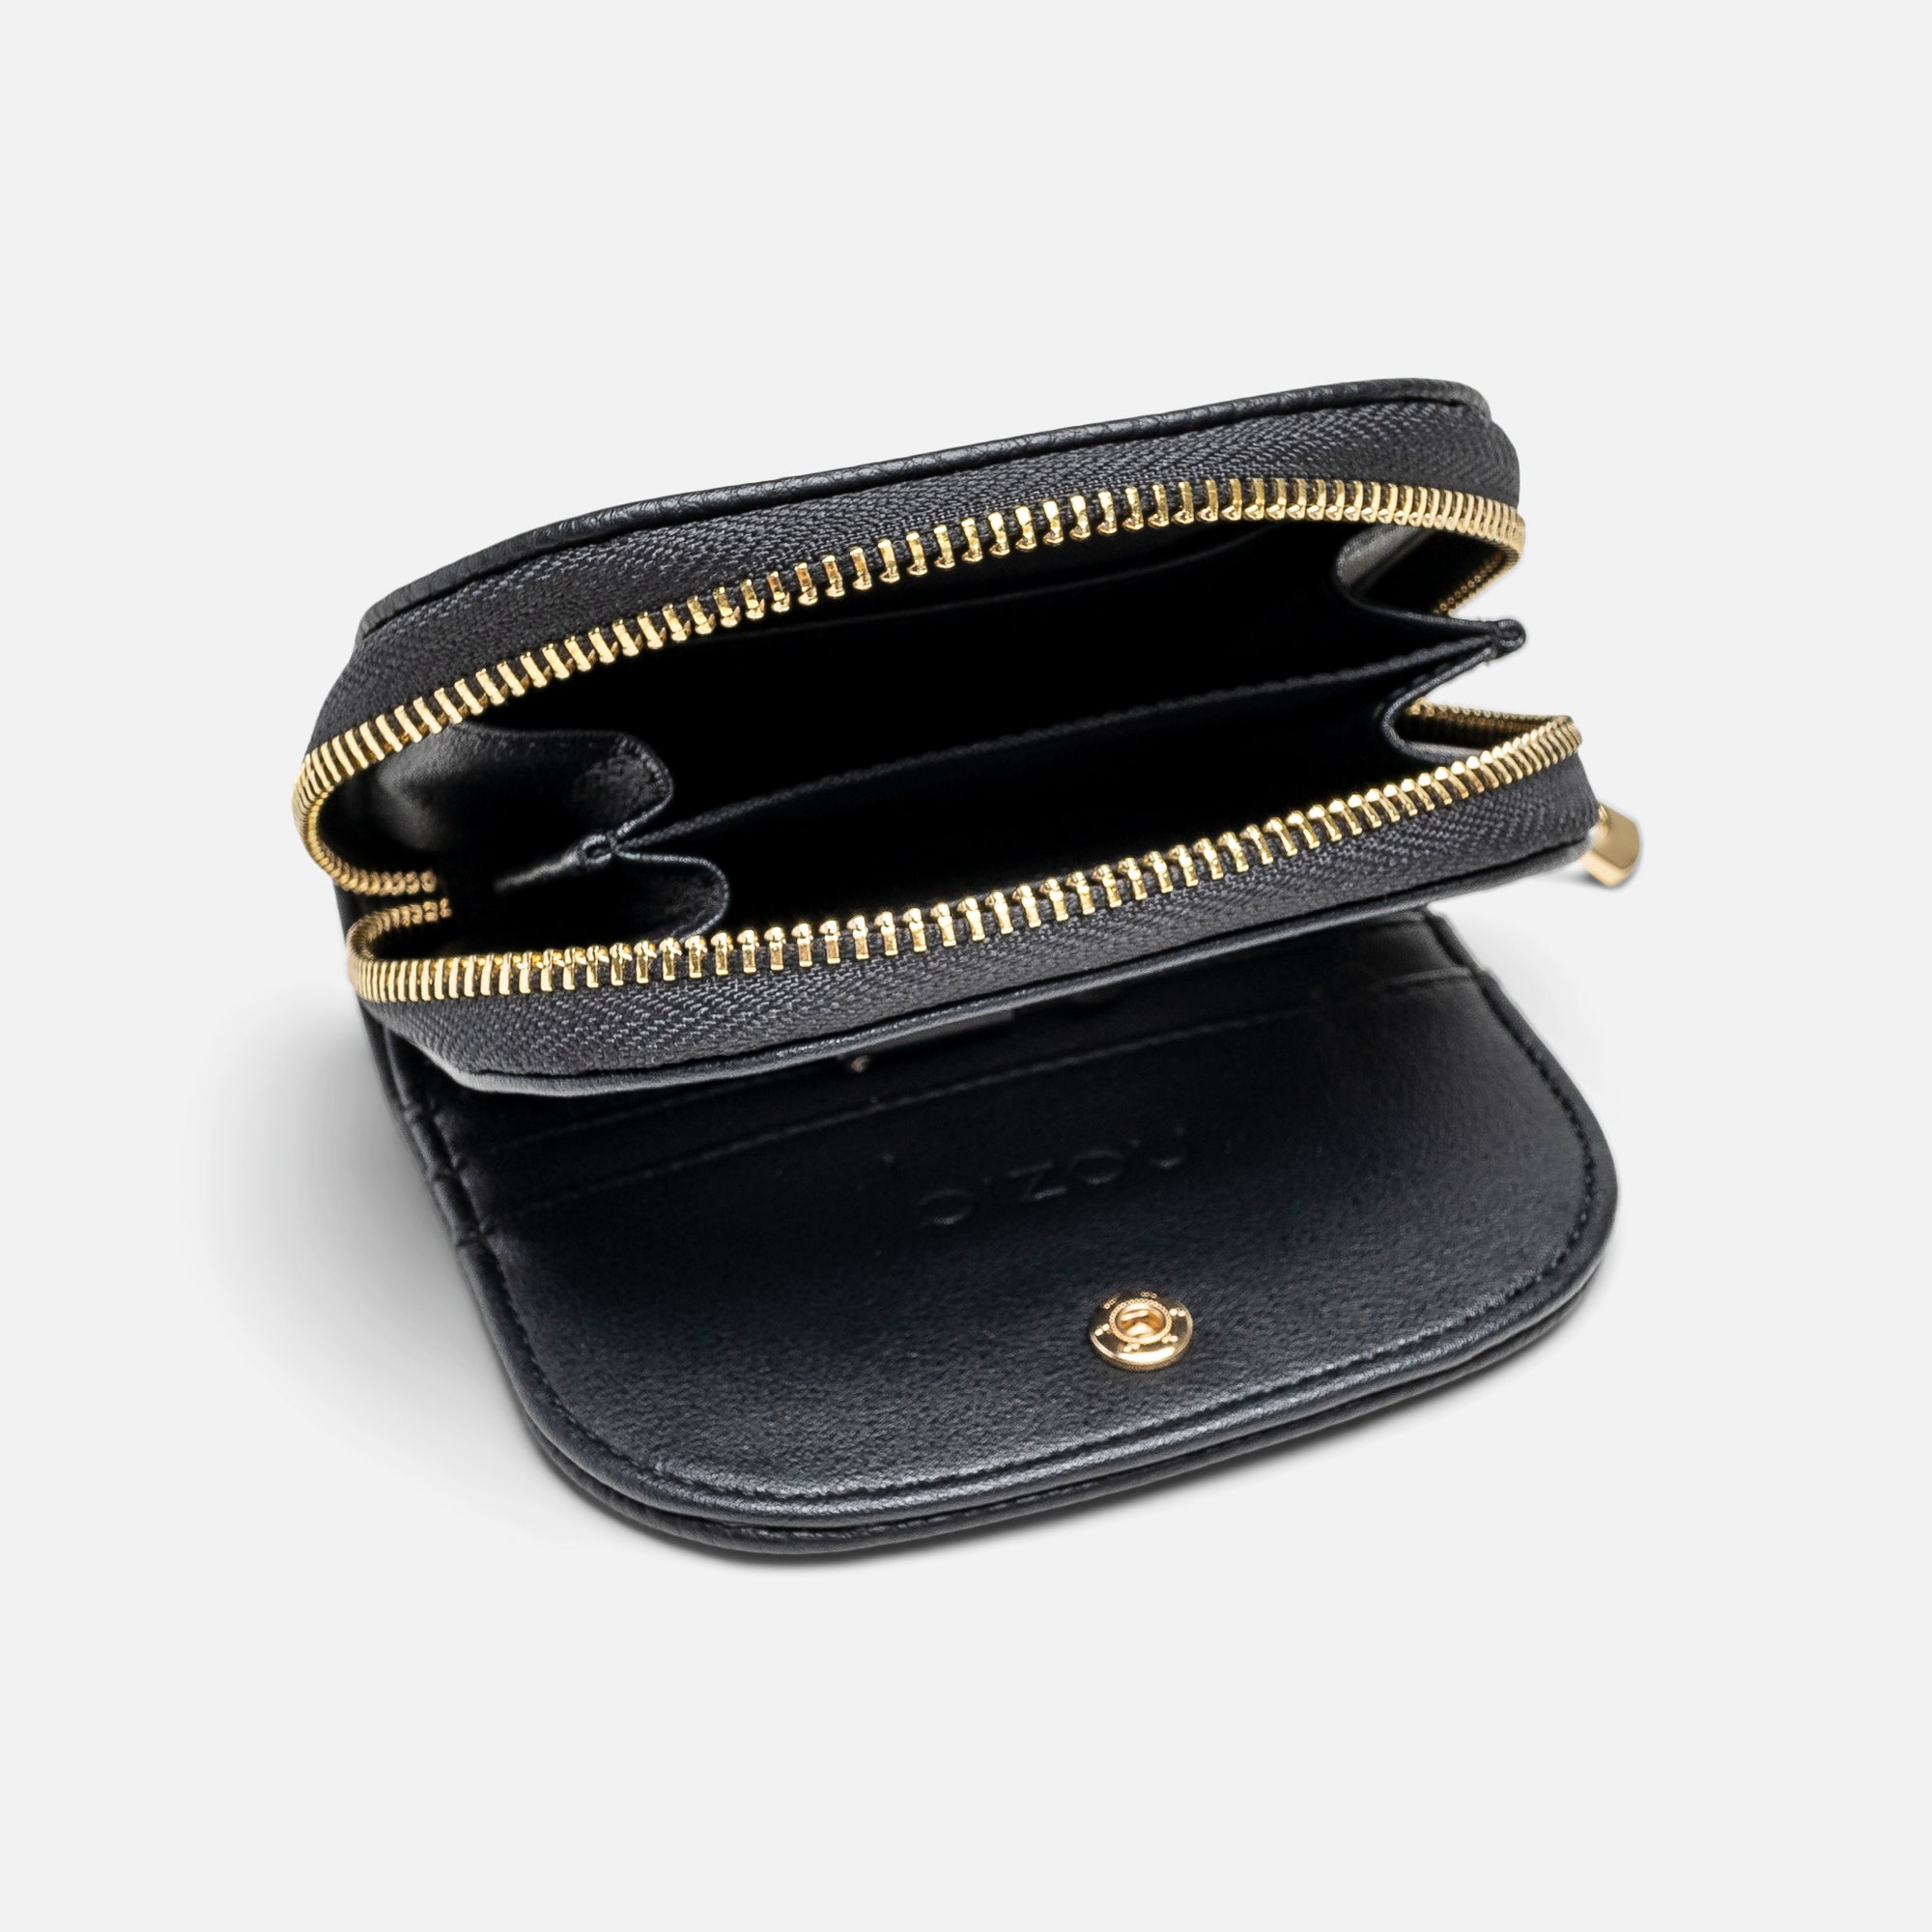 Black round shaped card holder in leatherette with gold details